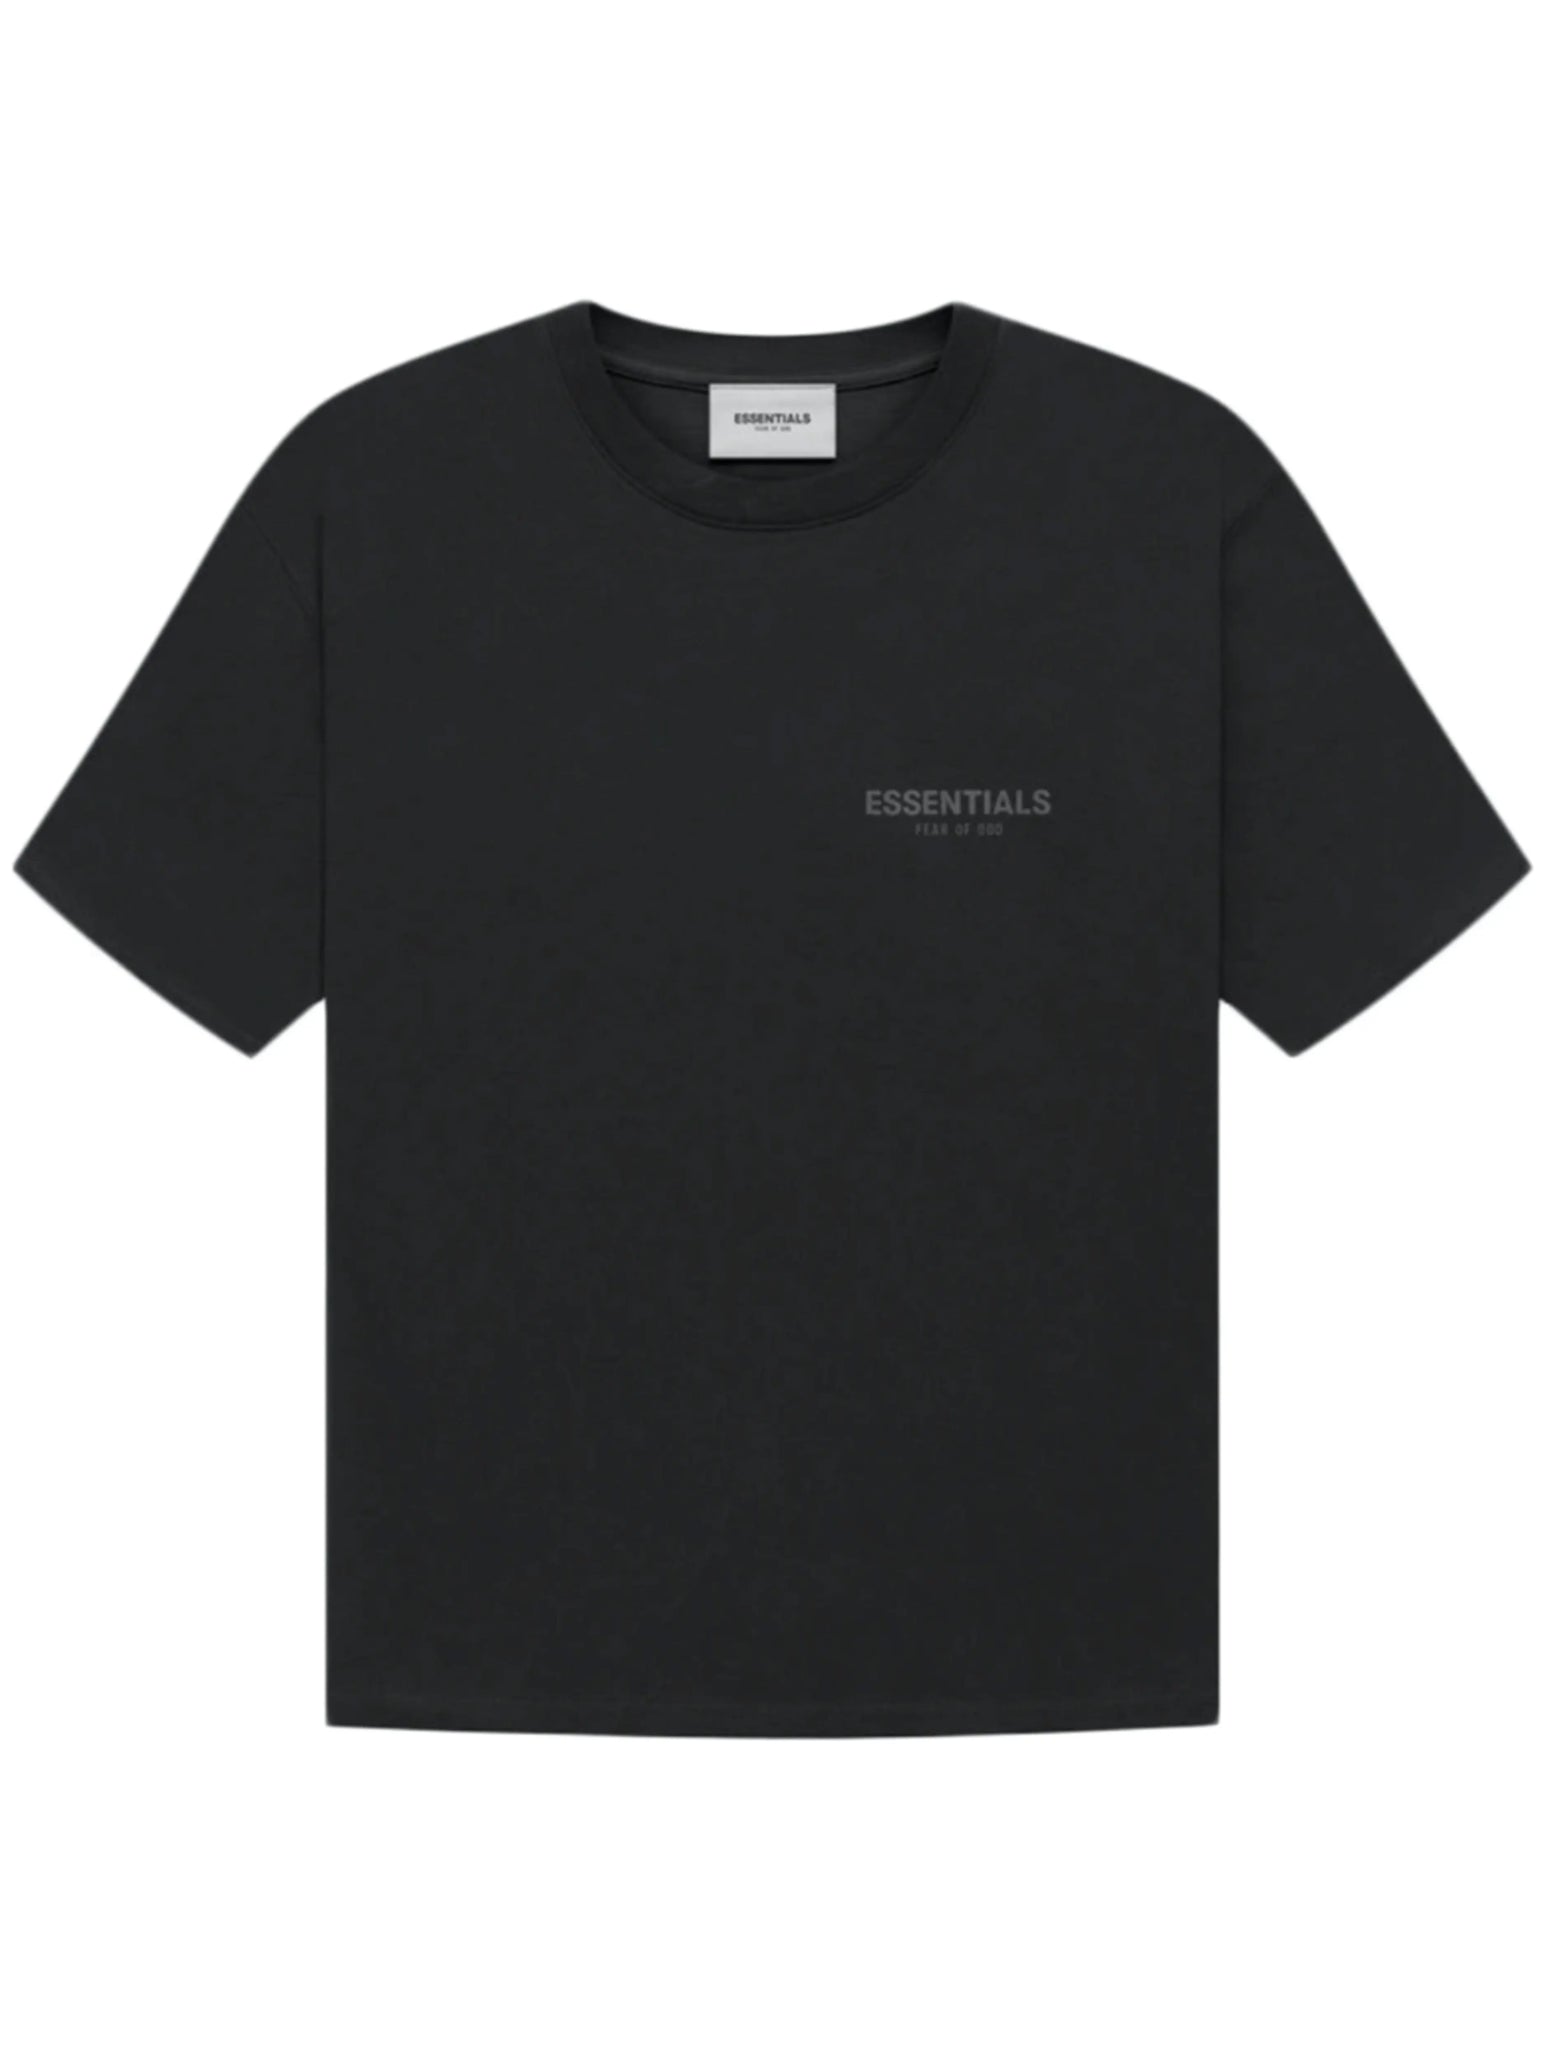 Fear of God Essentials Core Collection T-shirt Black [FW21] Prior